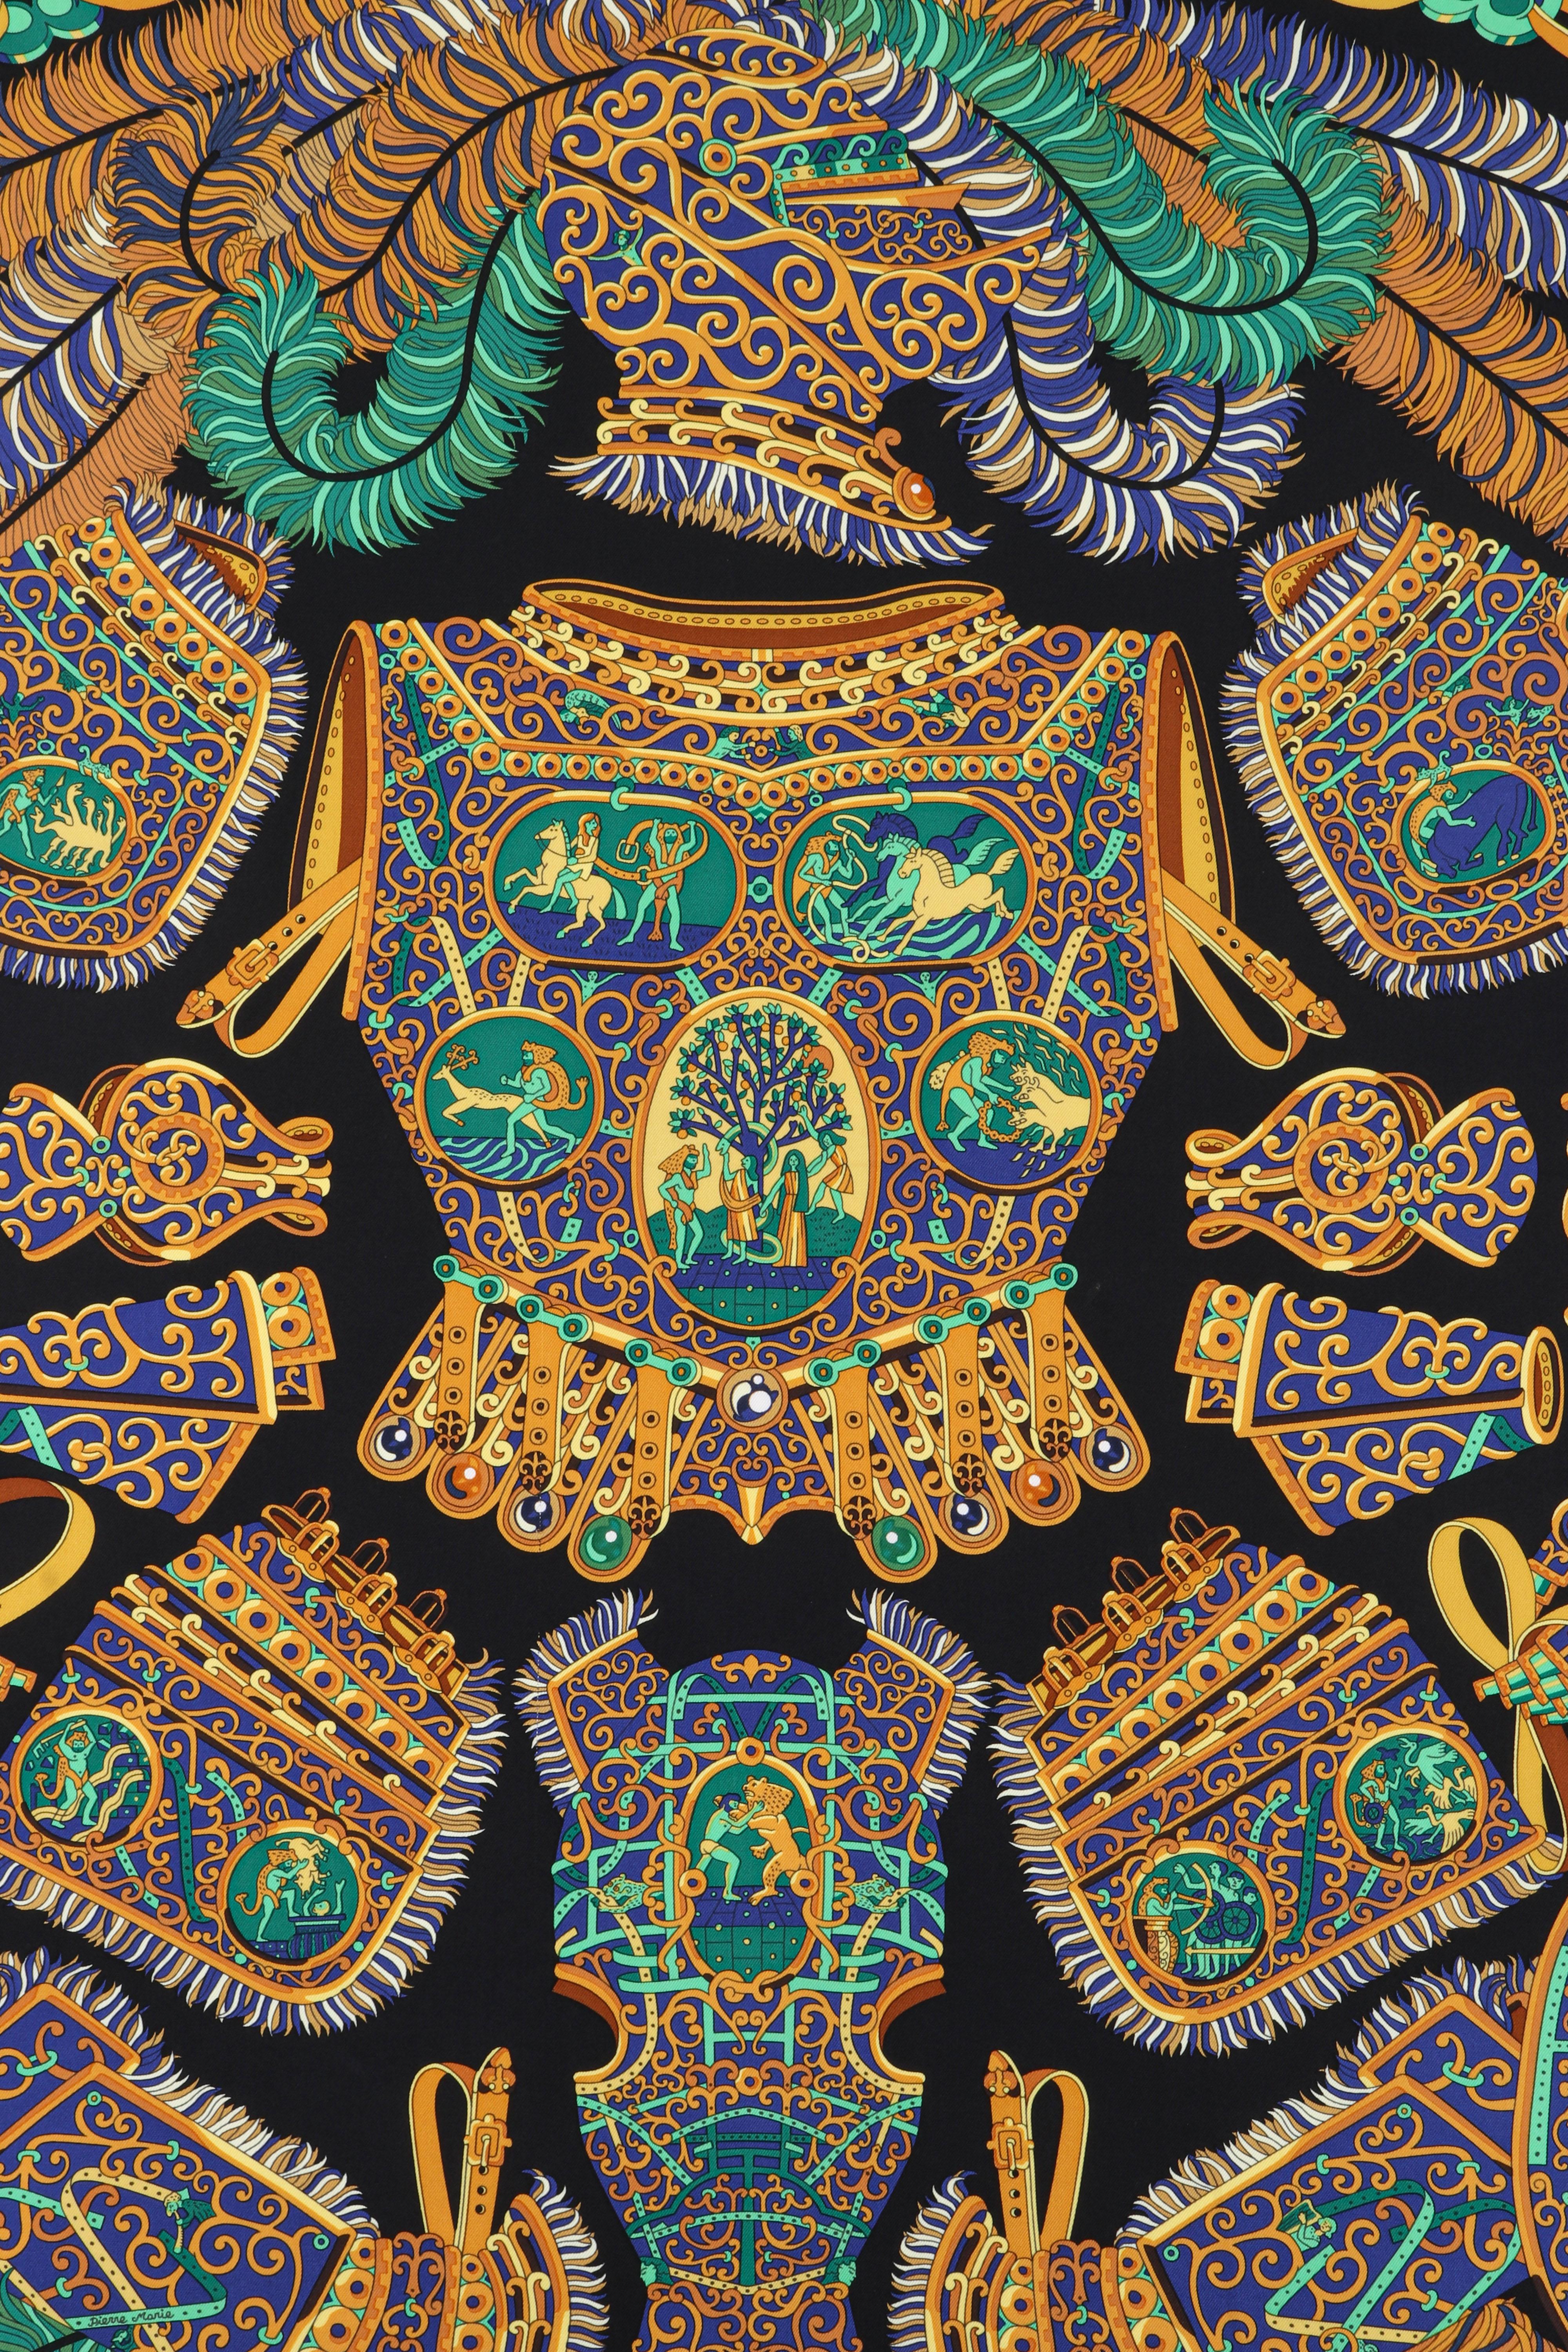 HERMES c. 2013 Pierre Marie “Sous l'Egide De Mars” Silk Multicolor Print Scarf
 
Brand/Manufacturer: Hermes 
Circa: 2013
Designer: Pierre Marie
Style: Square scarf
Color(s): Shades of black, blue, purple, yellow, green, turquoise, brown, and